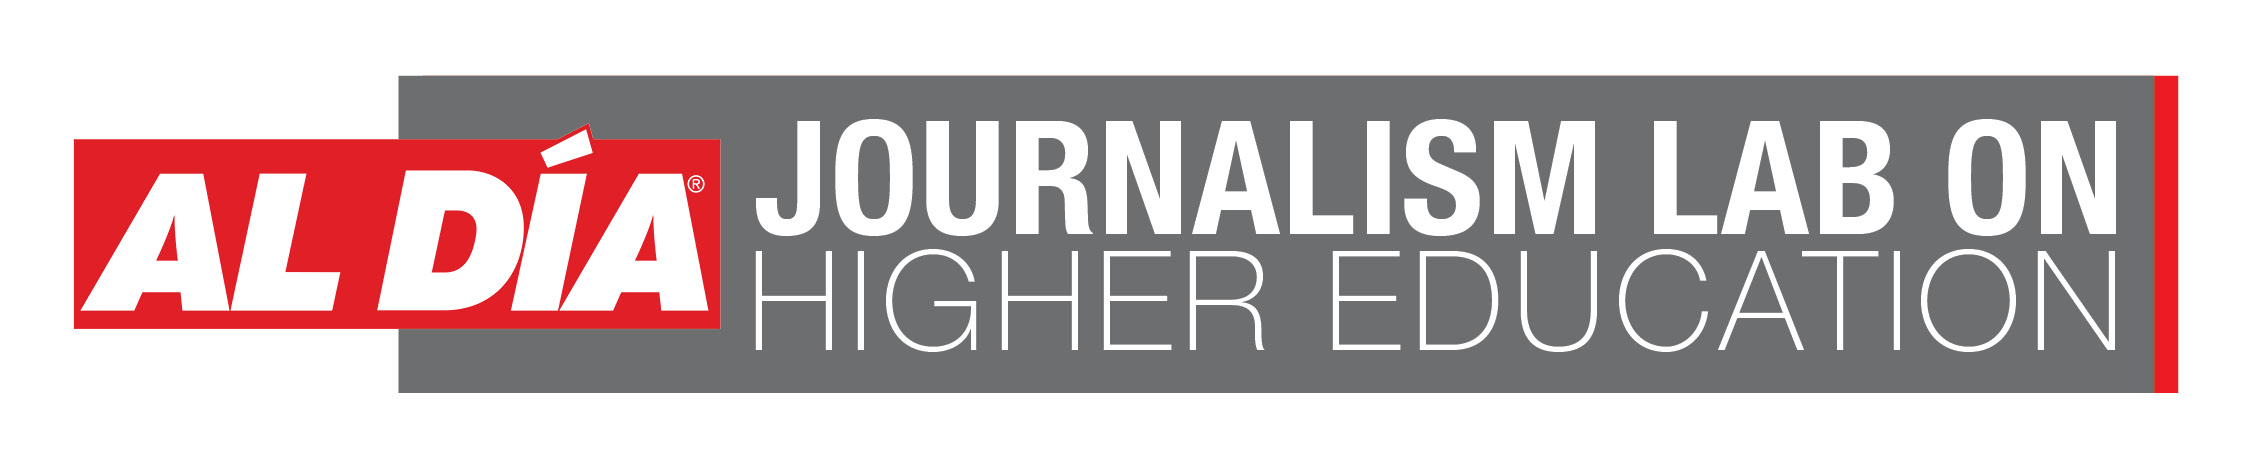 Journalism Lab on Higher Education